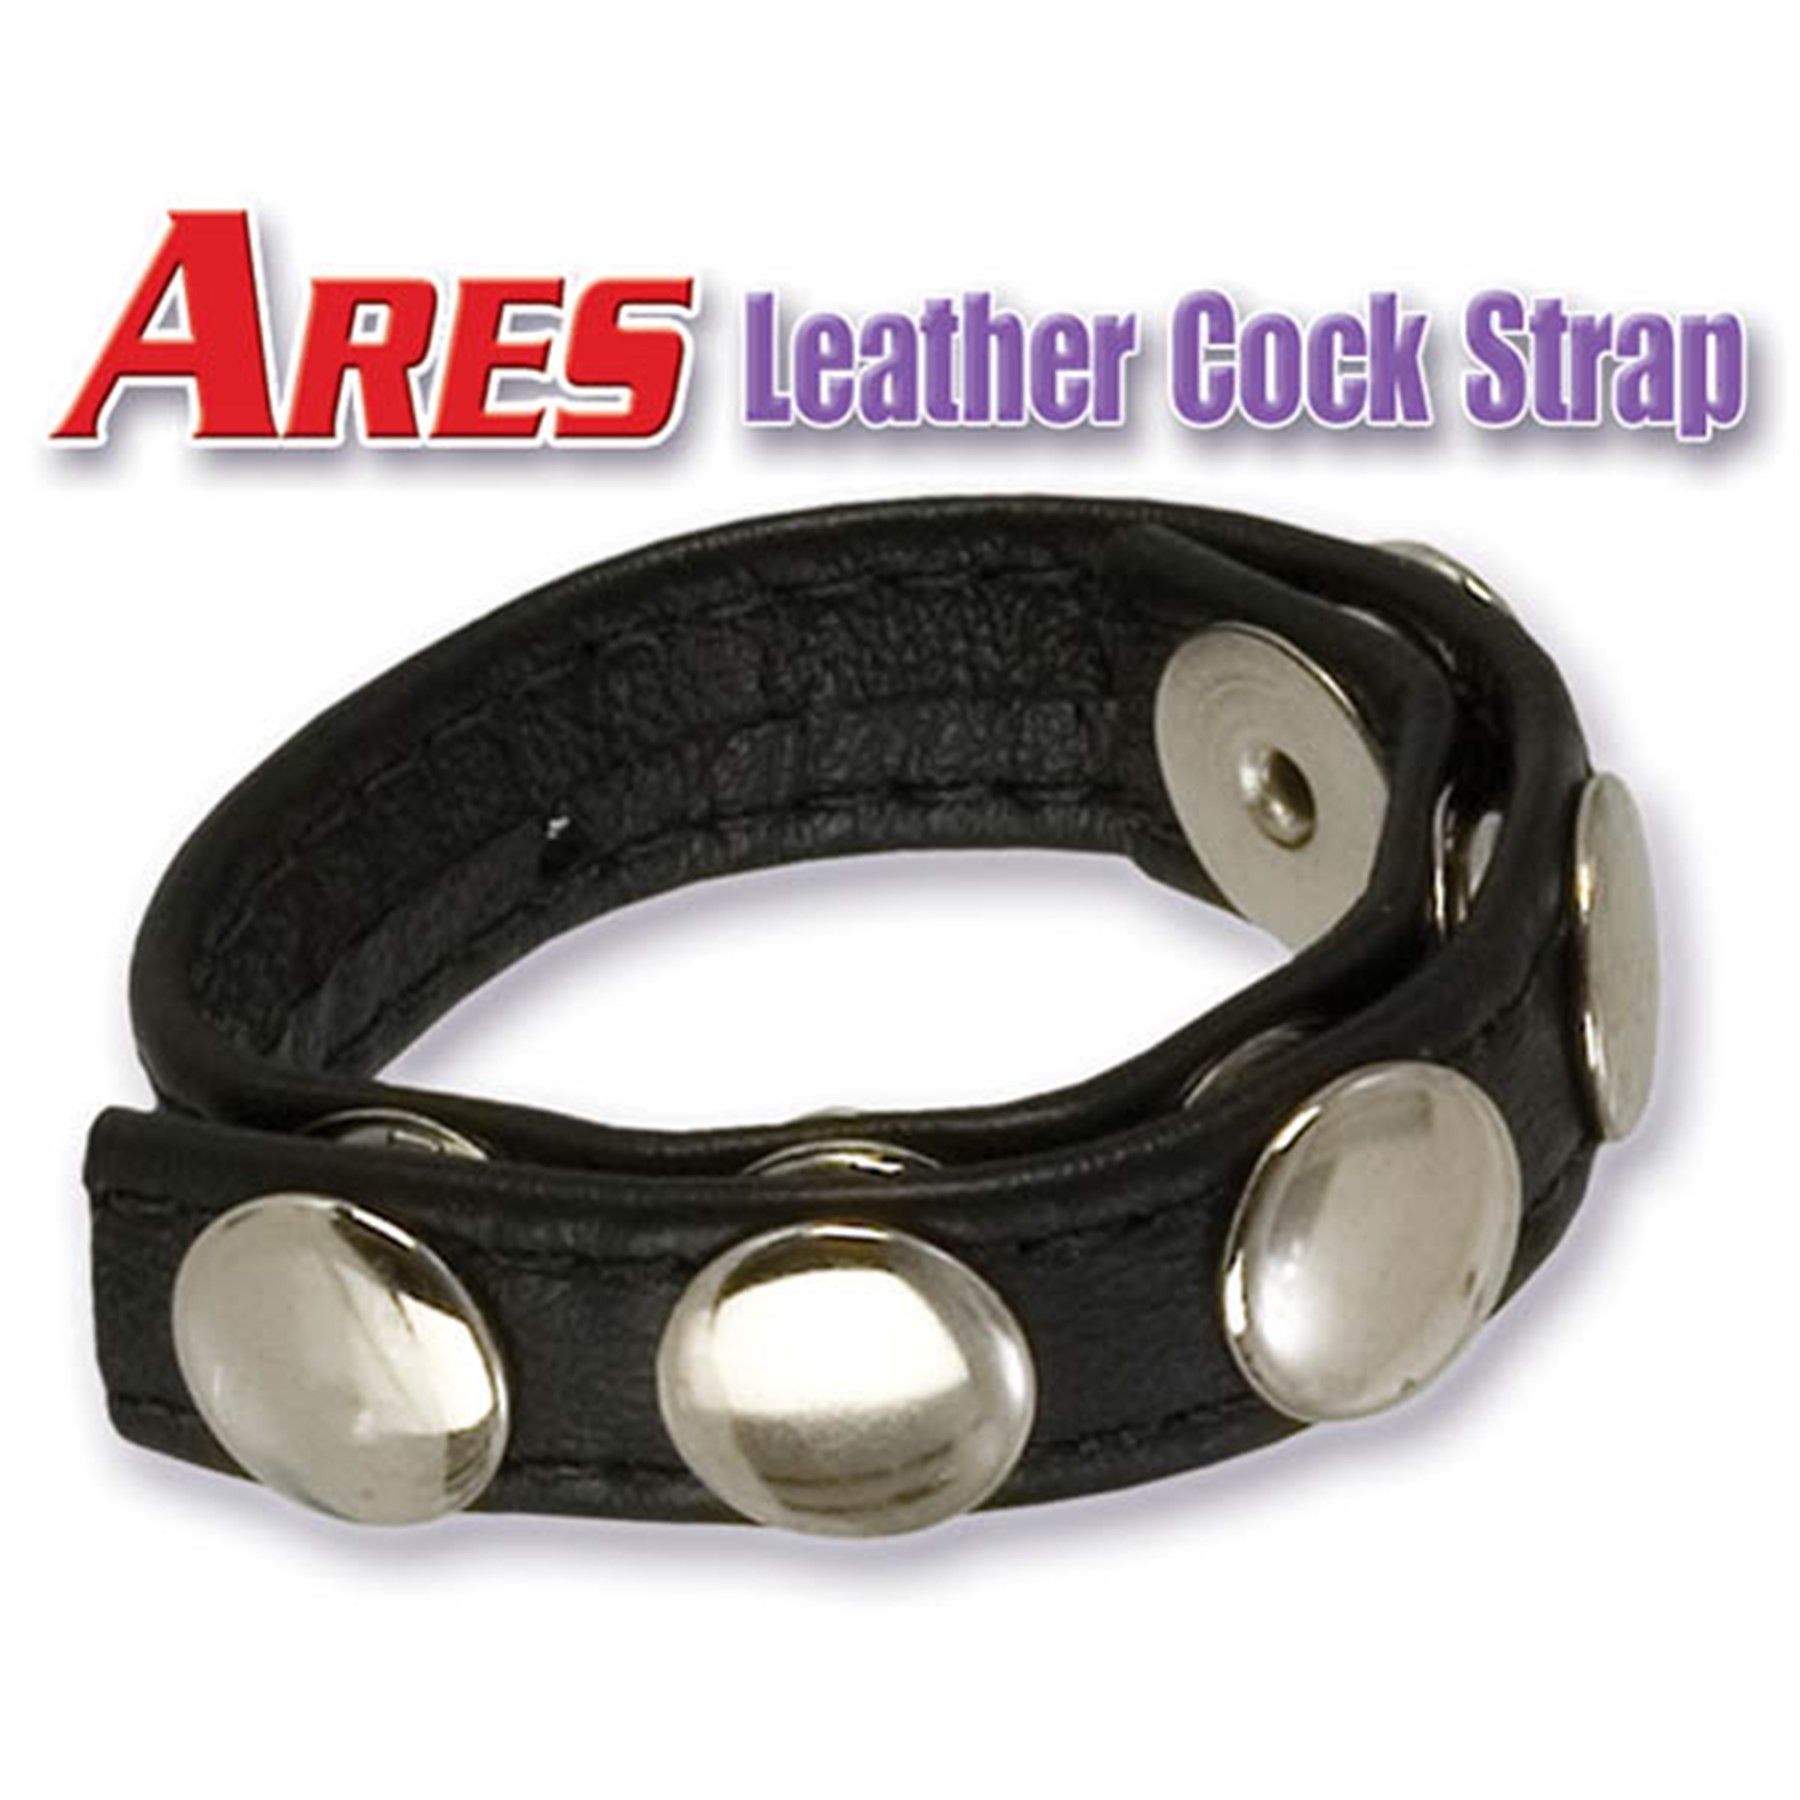 adonis-ares-leather-cock-strap